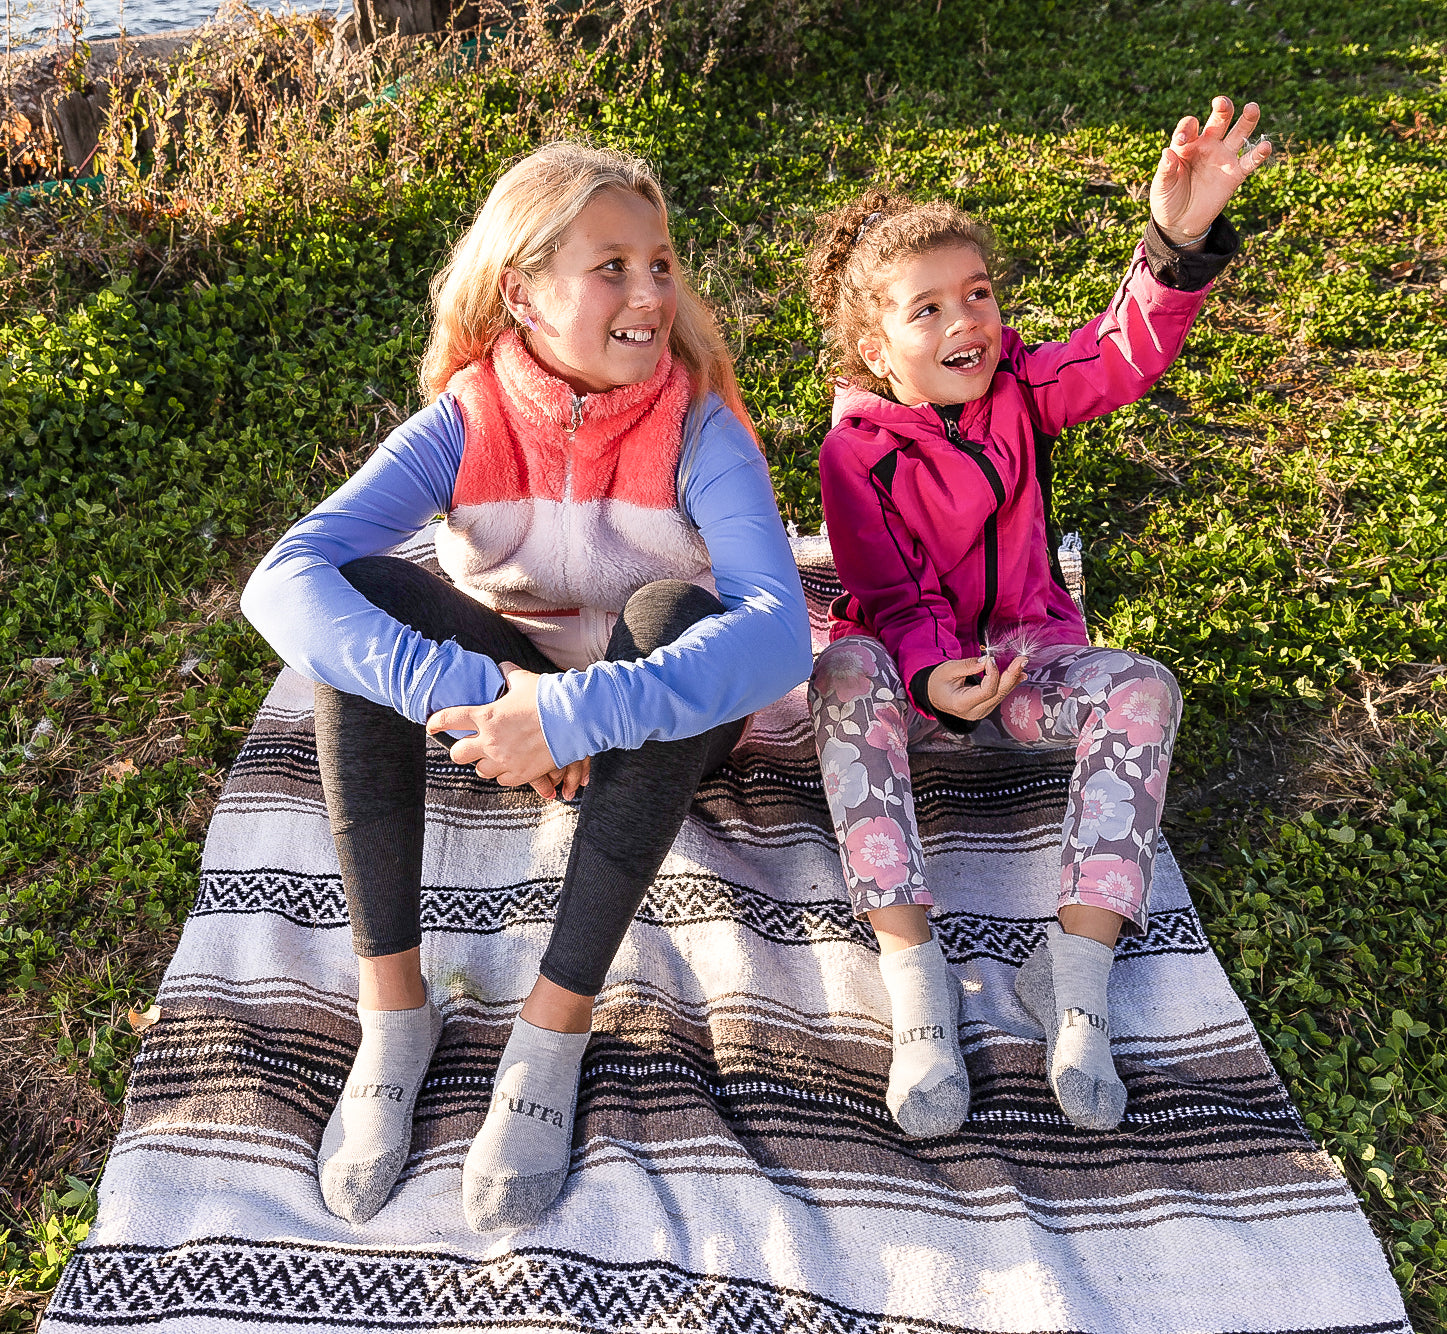 Two young girls are setting by the edge of a body of water on a blanket covering the grass.  The youngest on the right is wearing a bright pink jacket and floral leggings with her light grey Purra No Show Socks.  The older girl on the left is wearing a furry vest and black leggings also with her light grey Purra No Show socks